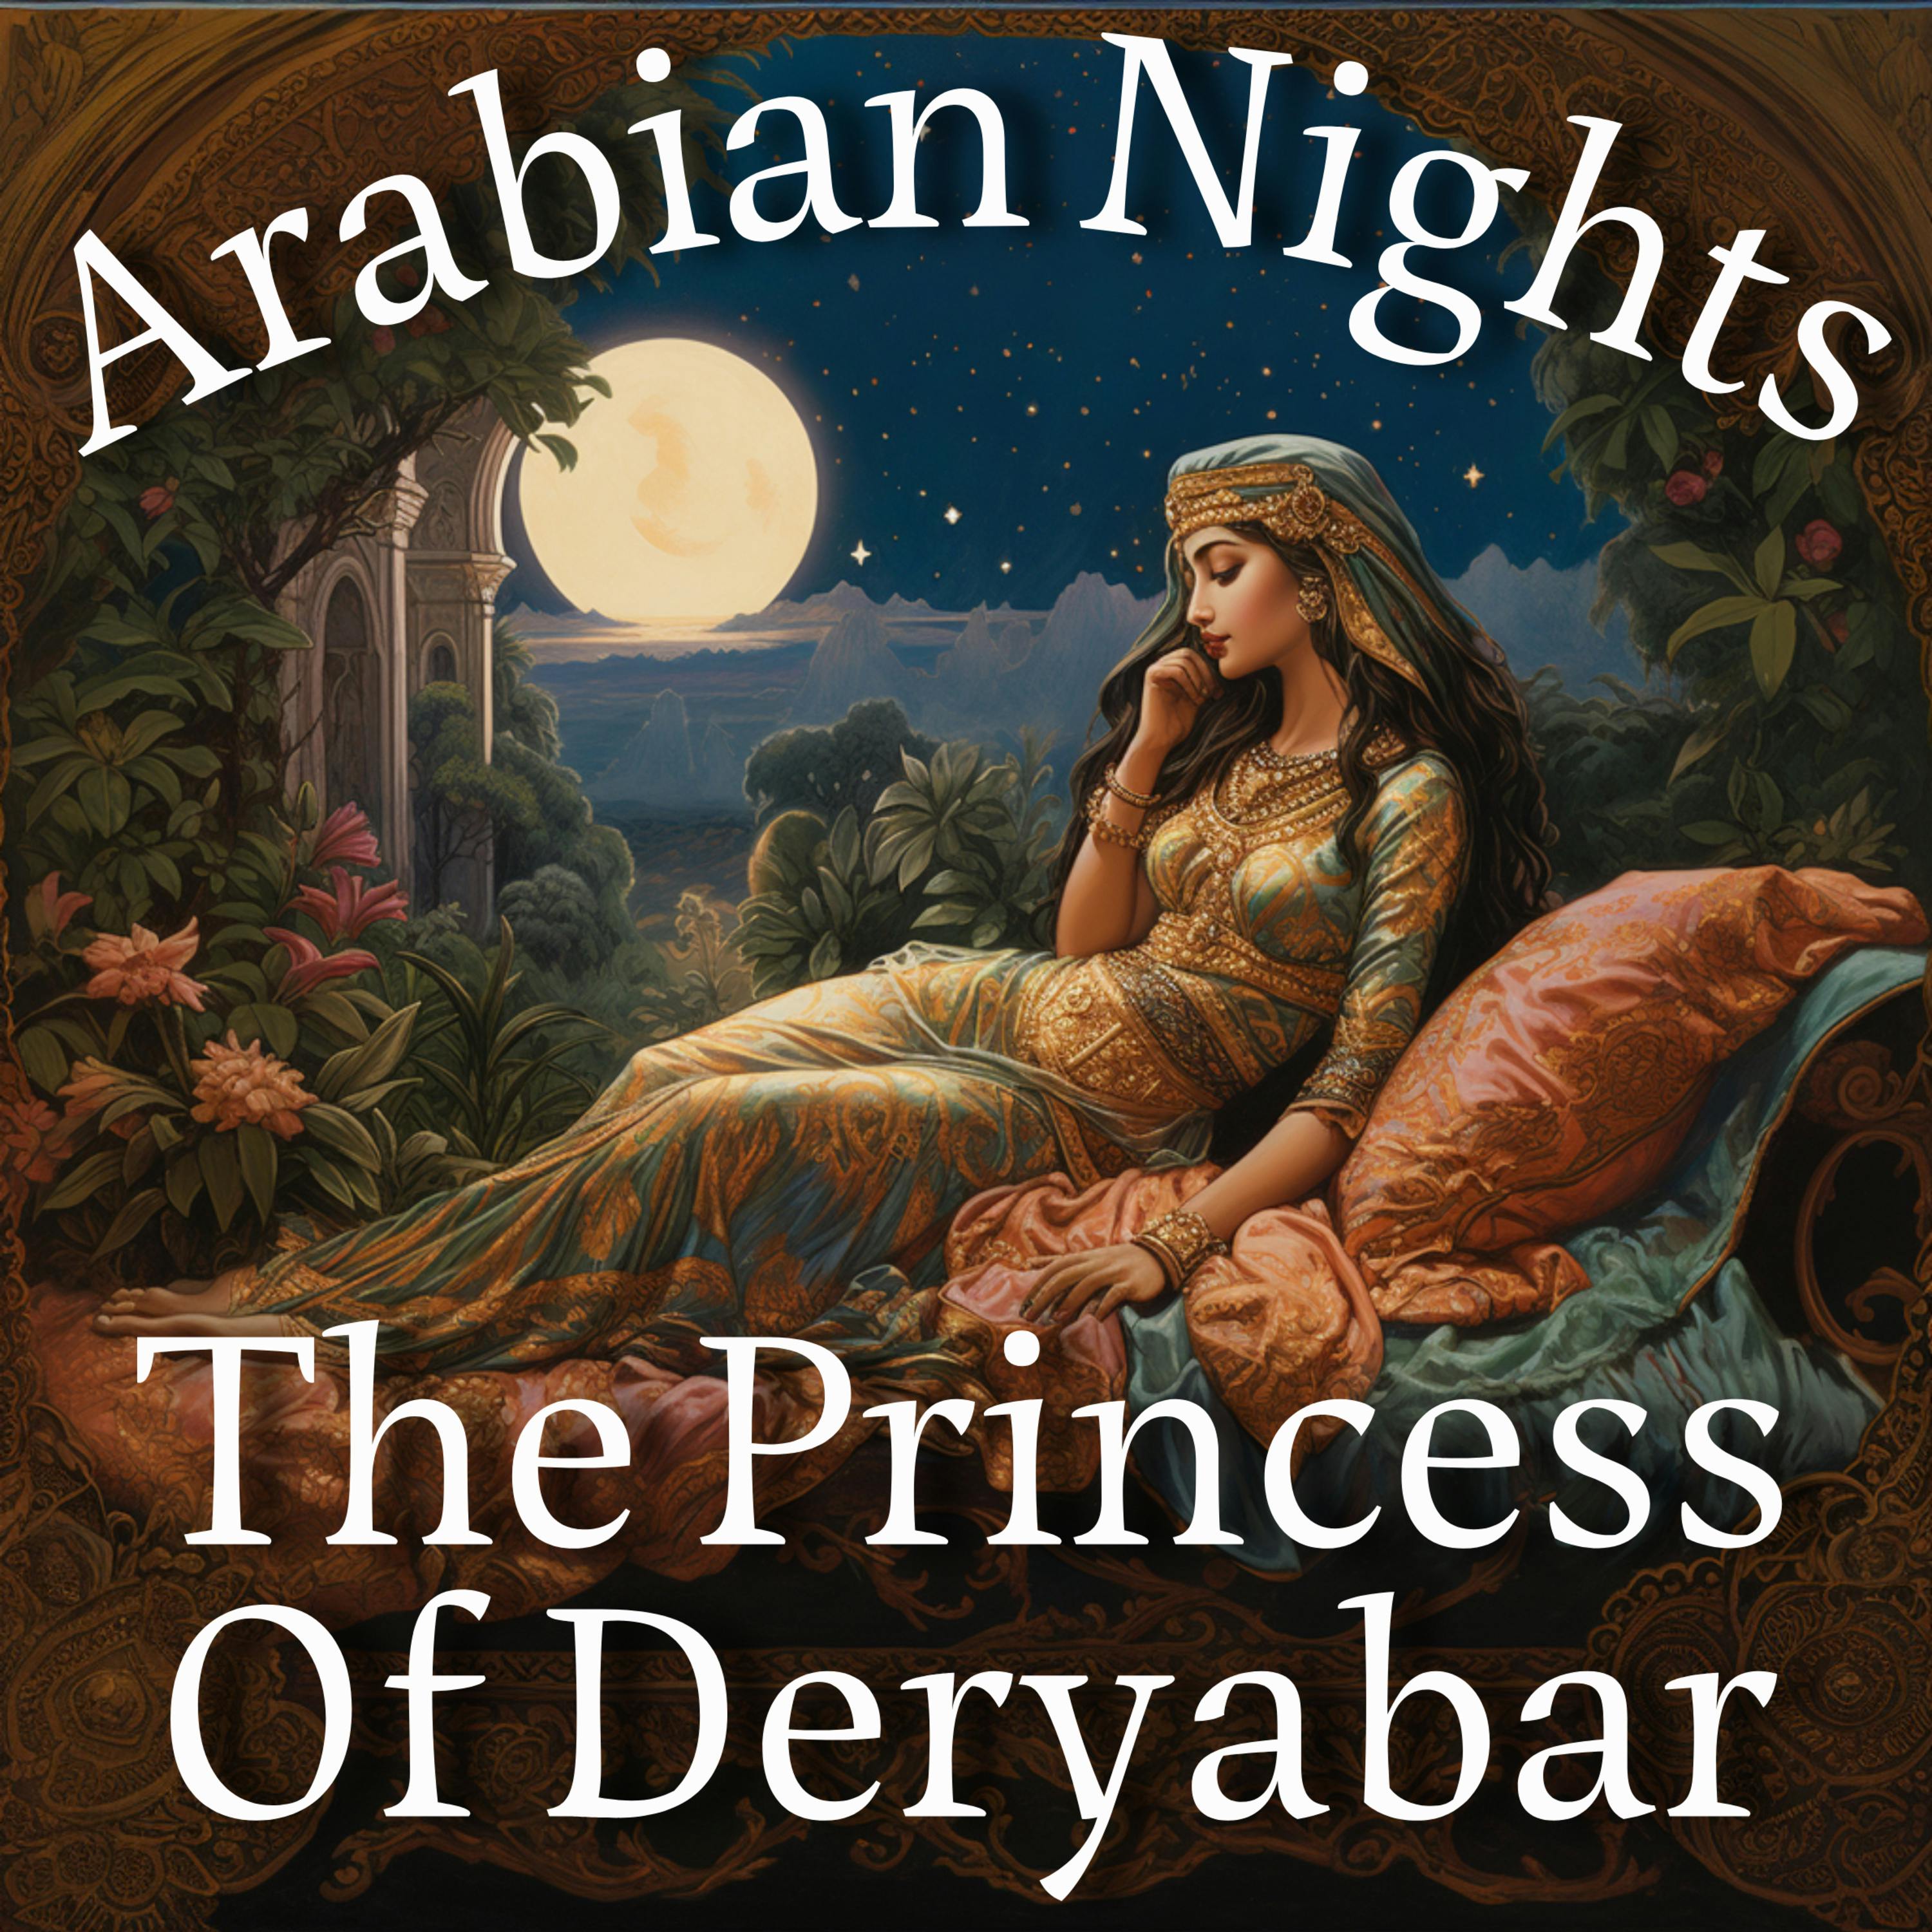 The Story Of The Princess Of Deryabar (From Arabian Nights)